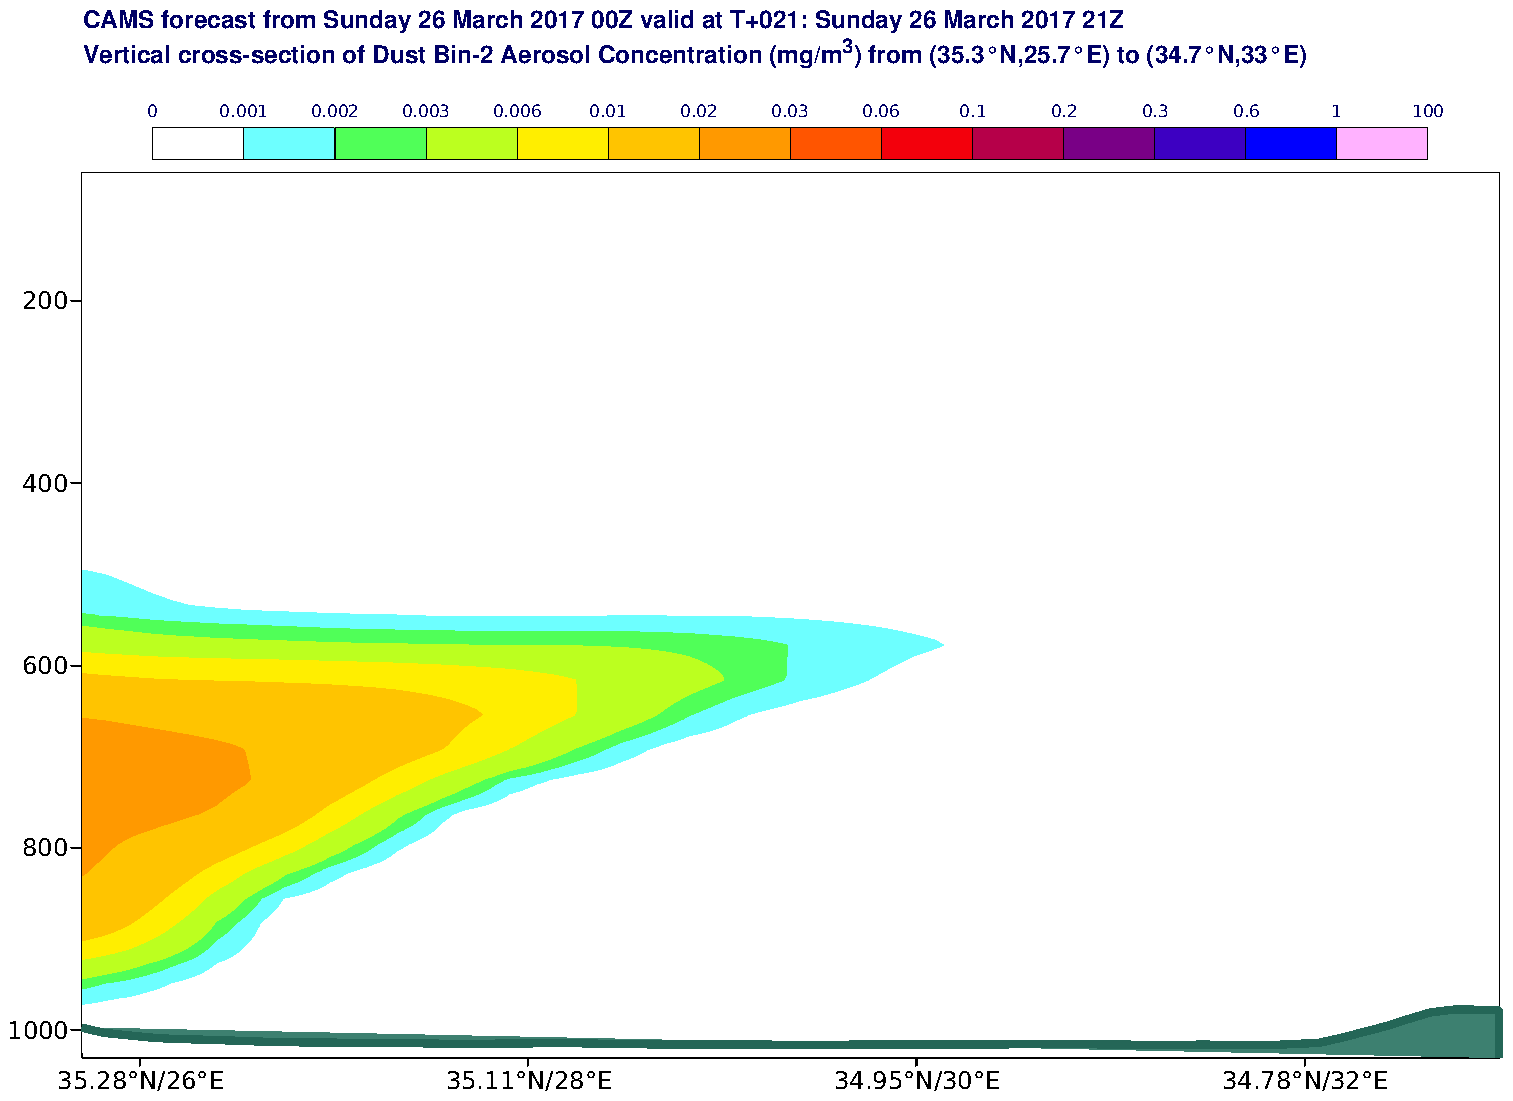 Vertical cross-section of Dust Bin-2 Aerosol Concentration (mg/m3) valid at T21 - 2017-03-26 21:00